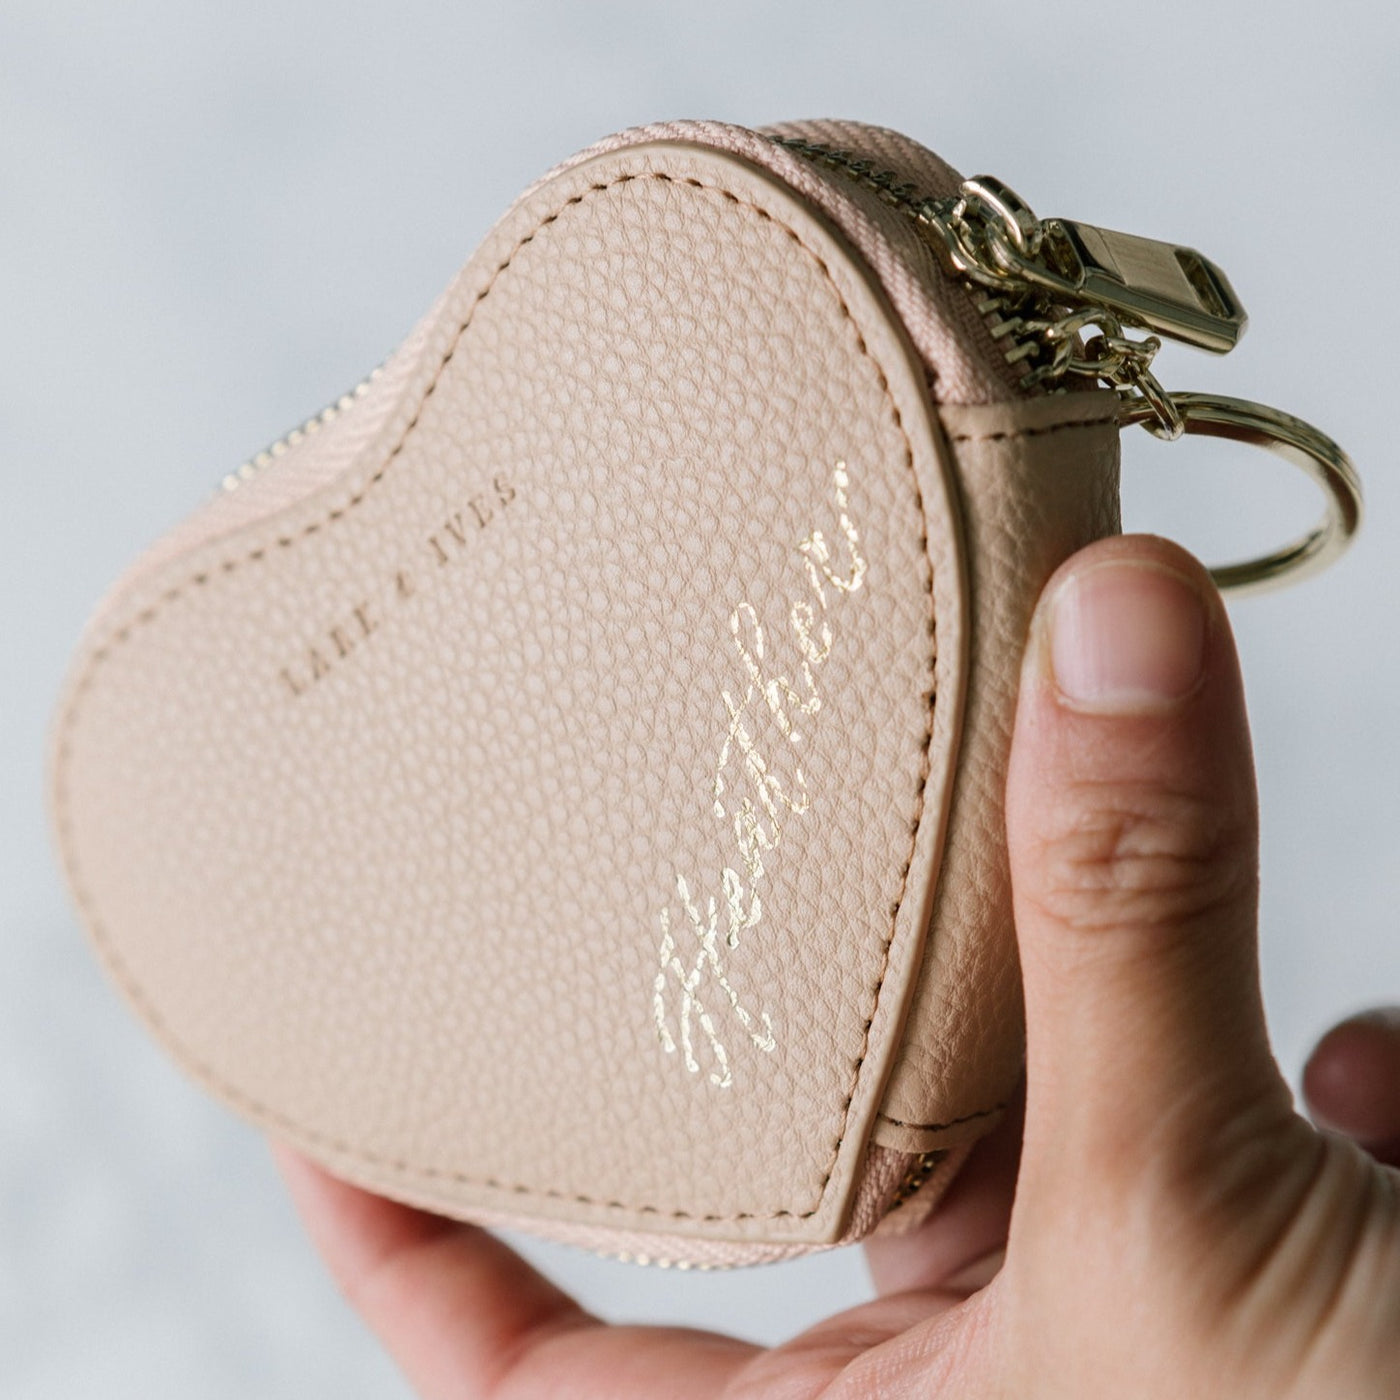 Lark and Ives / Vegan Leather Accessories / Small Accessories / Coin Purse / Heart shaped / Coin Pouch / Mini Wallet / Gold foil personalization on Nude Pink Coin Purse